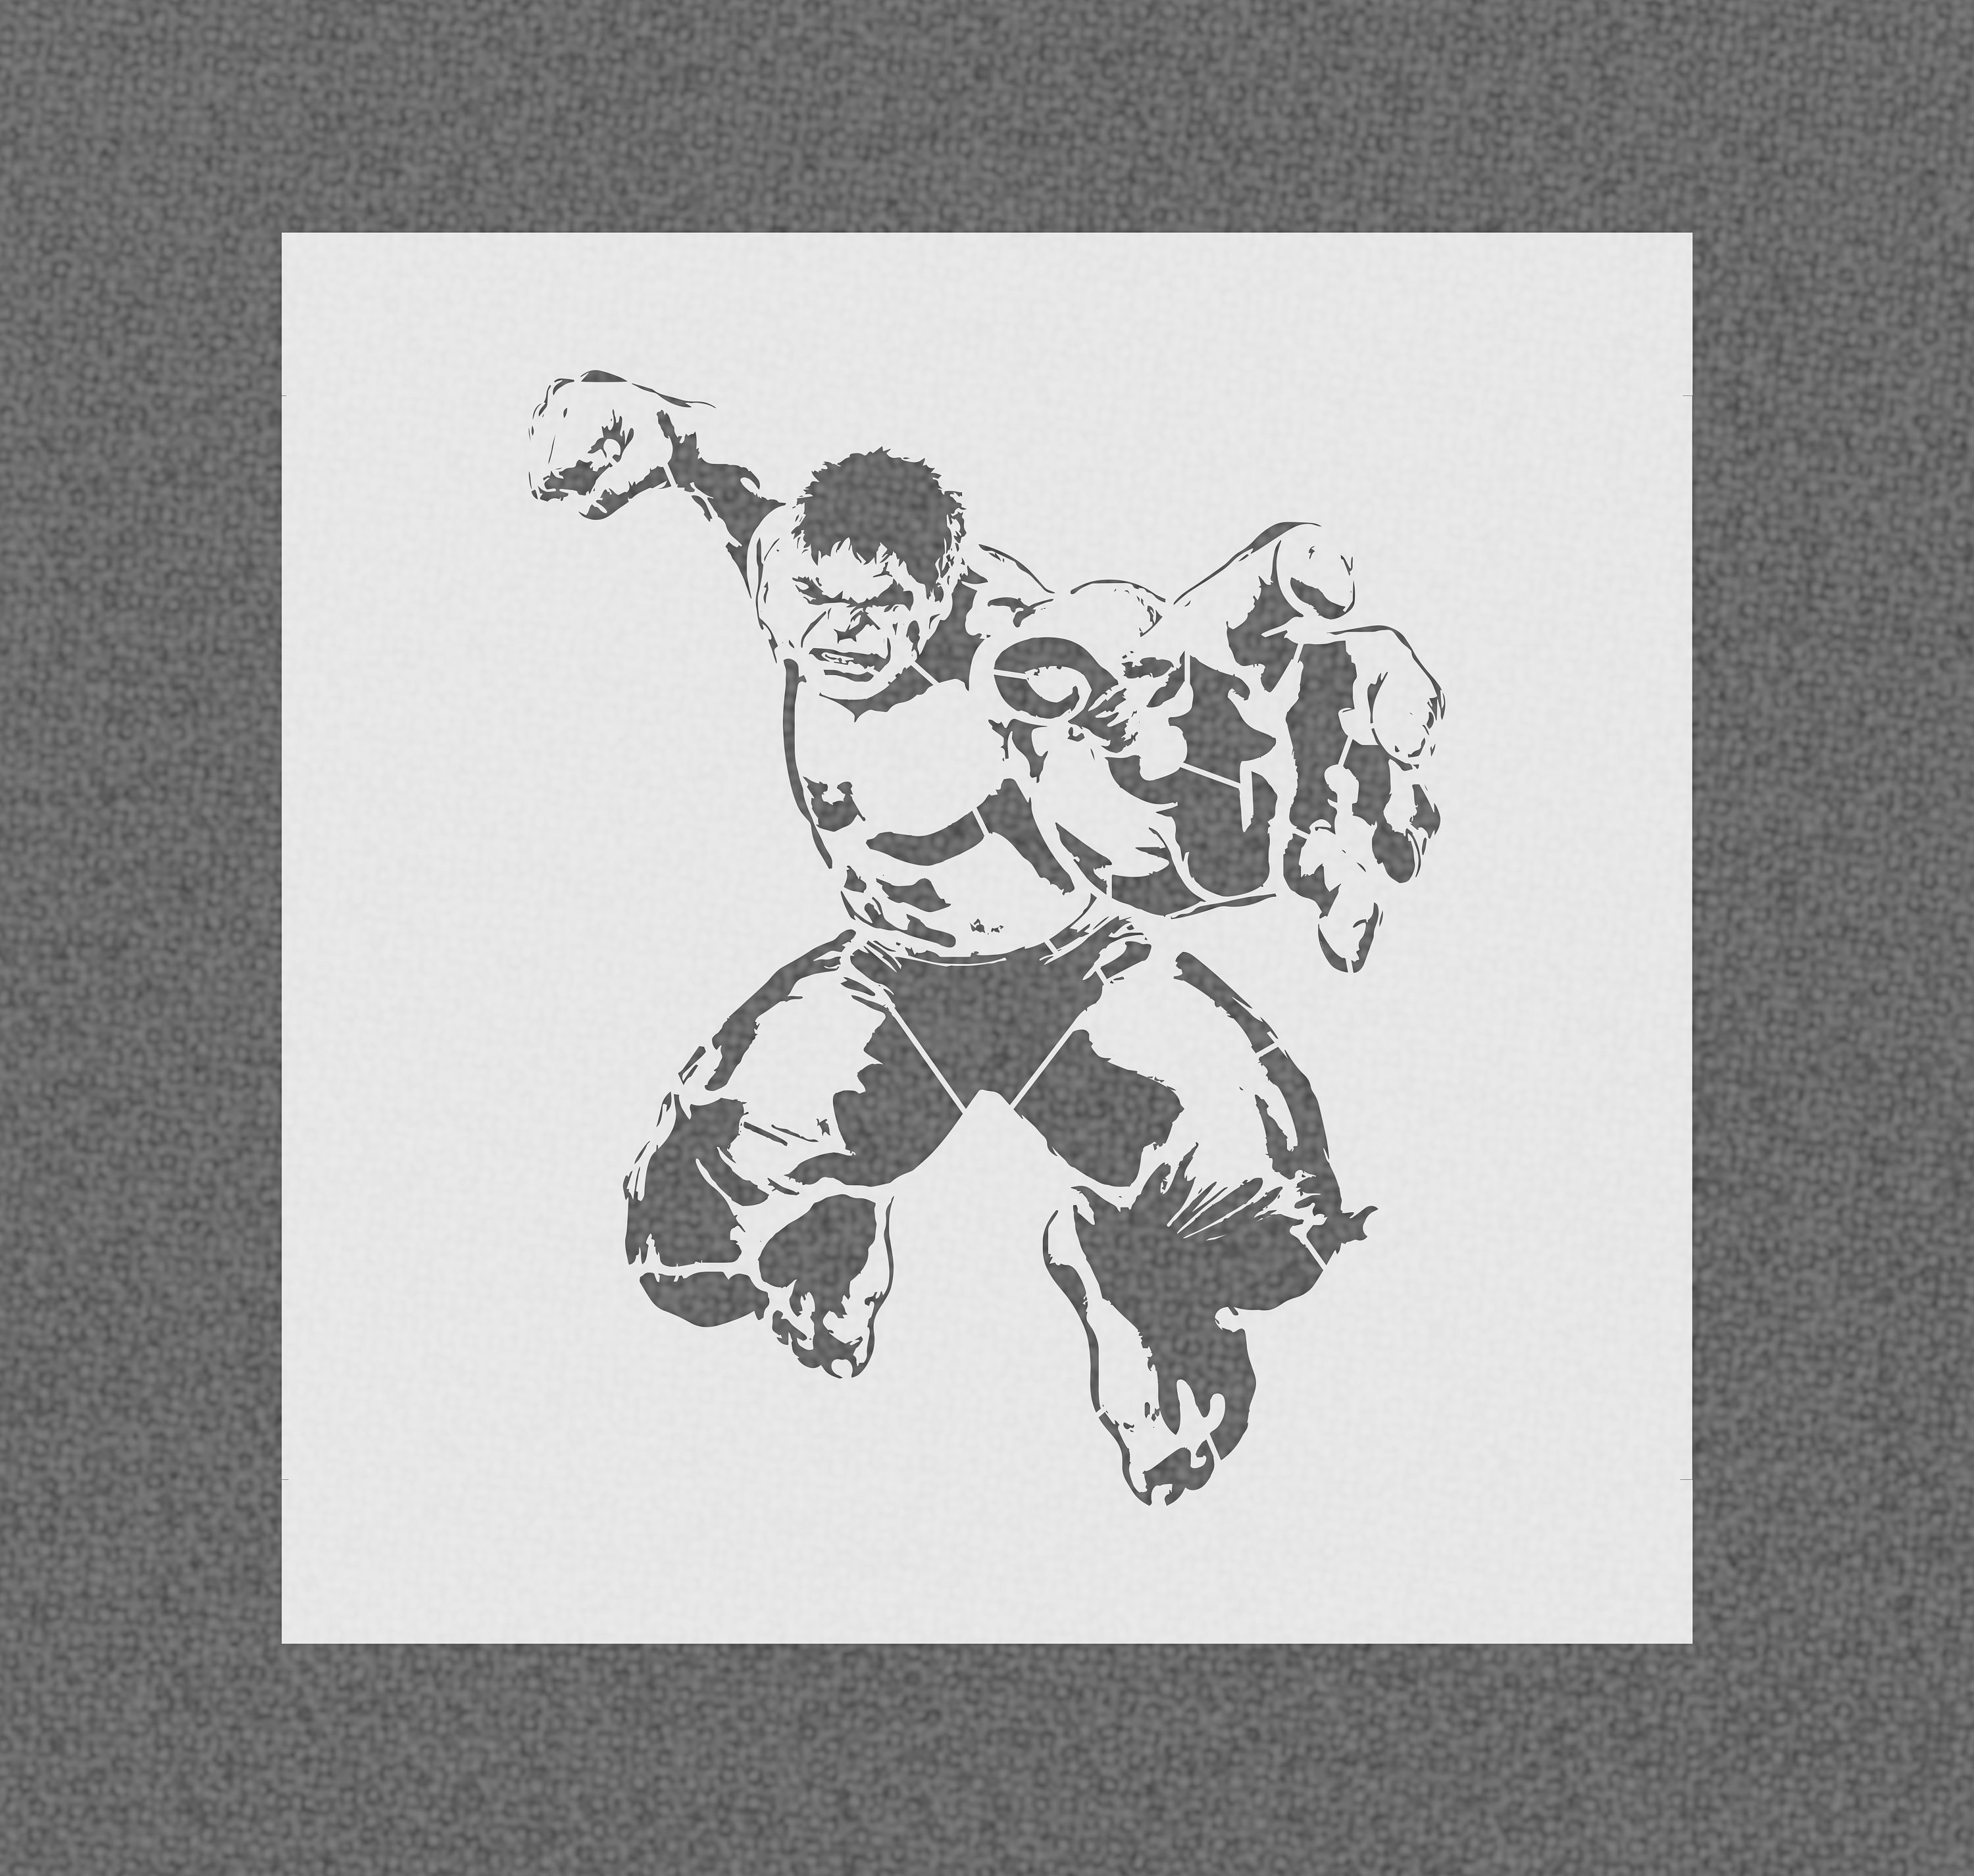 The avengers green hulk walking wall art stencil,Strong,Reusable,Recyclable 